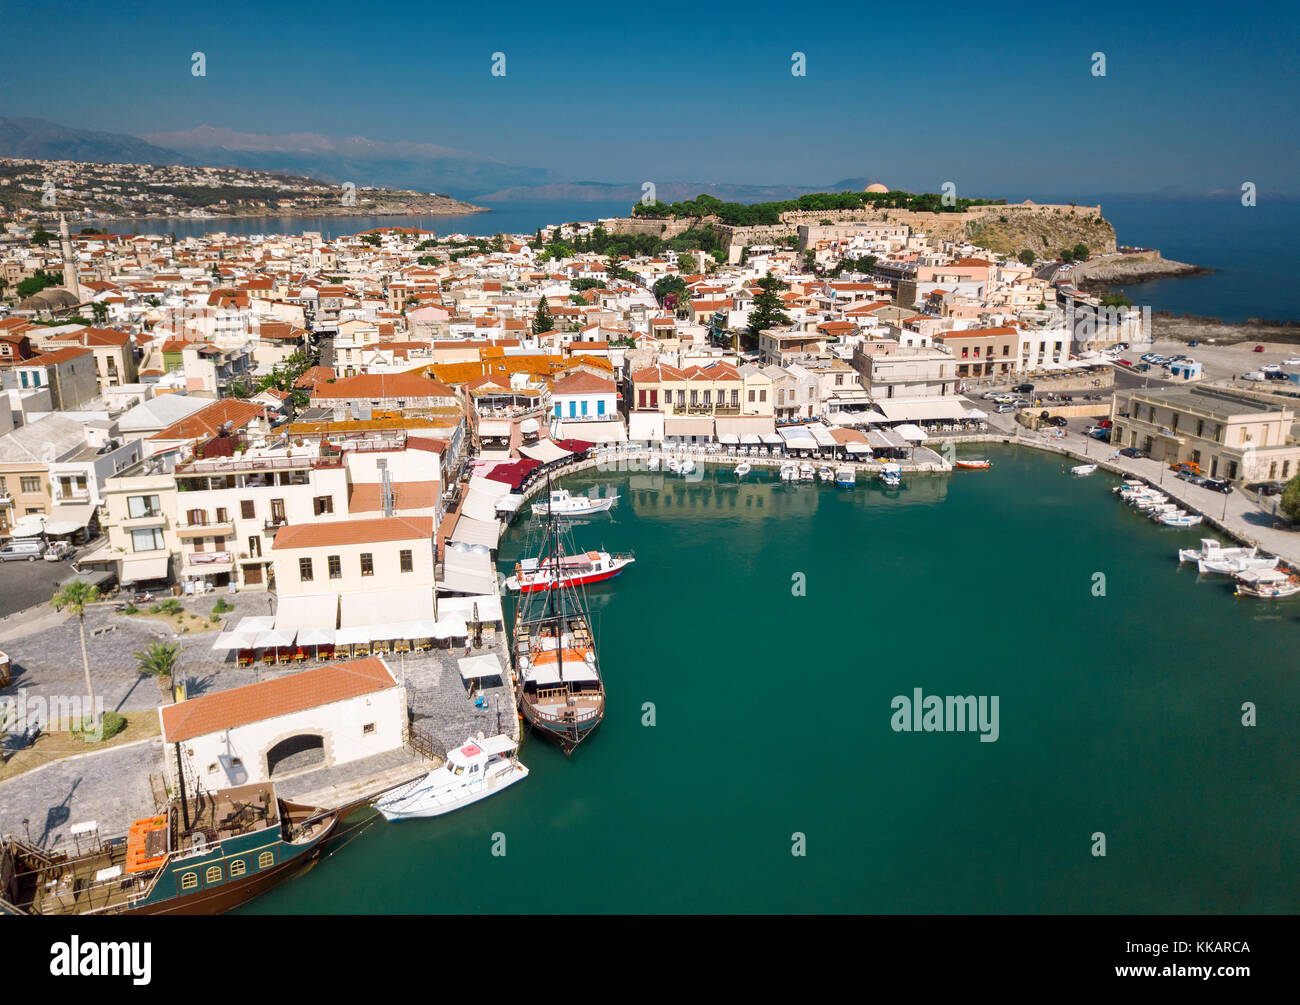 Aerial view of Rethymno old town, Venetian Harbour and fortress, Crete Island, Greek Islands, Greece, Europe Stock Photo